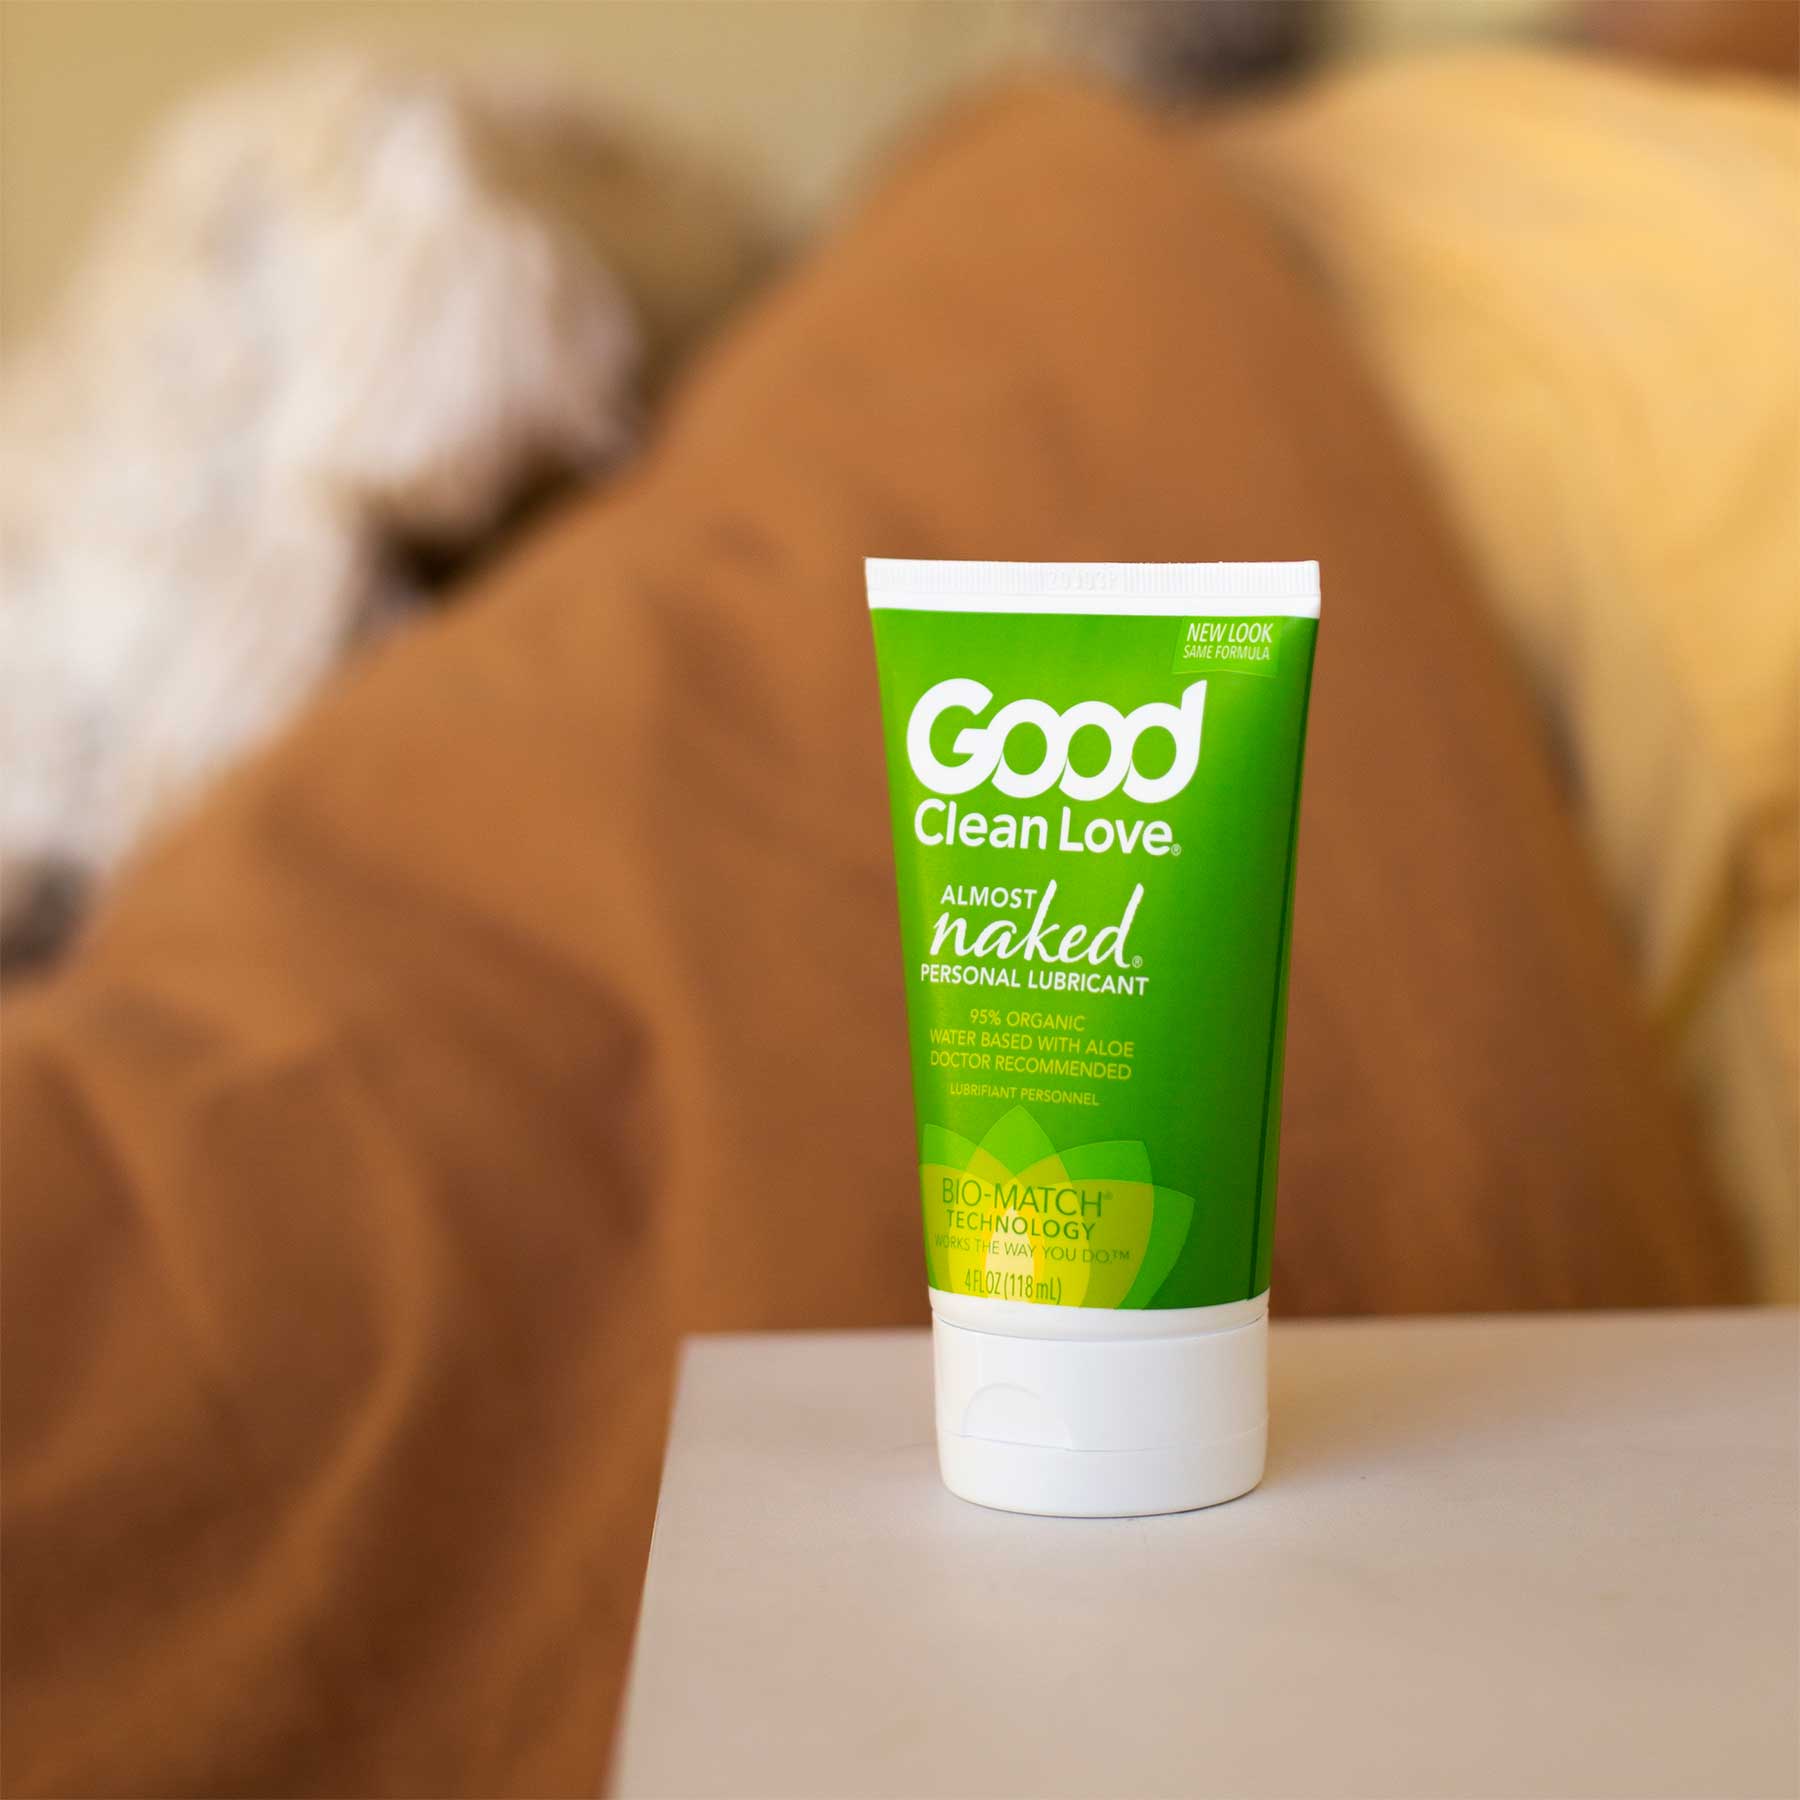 Good Clean Love Almost Naked Personal Lubricant, Organic Water-Based Lube  with Aloe Vera, Safe for Toys & Condoms, Intimate Wellness Gel for Men 